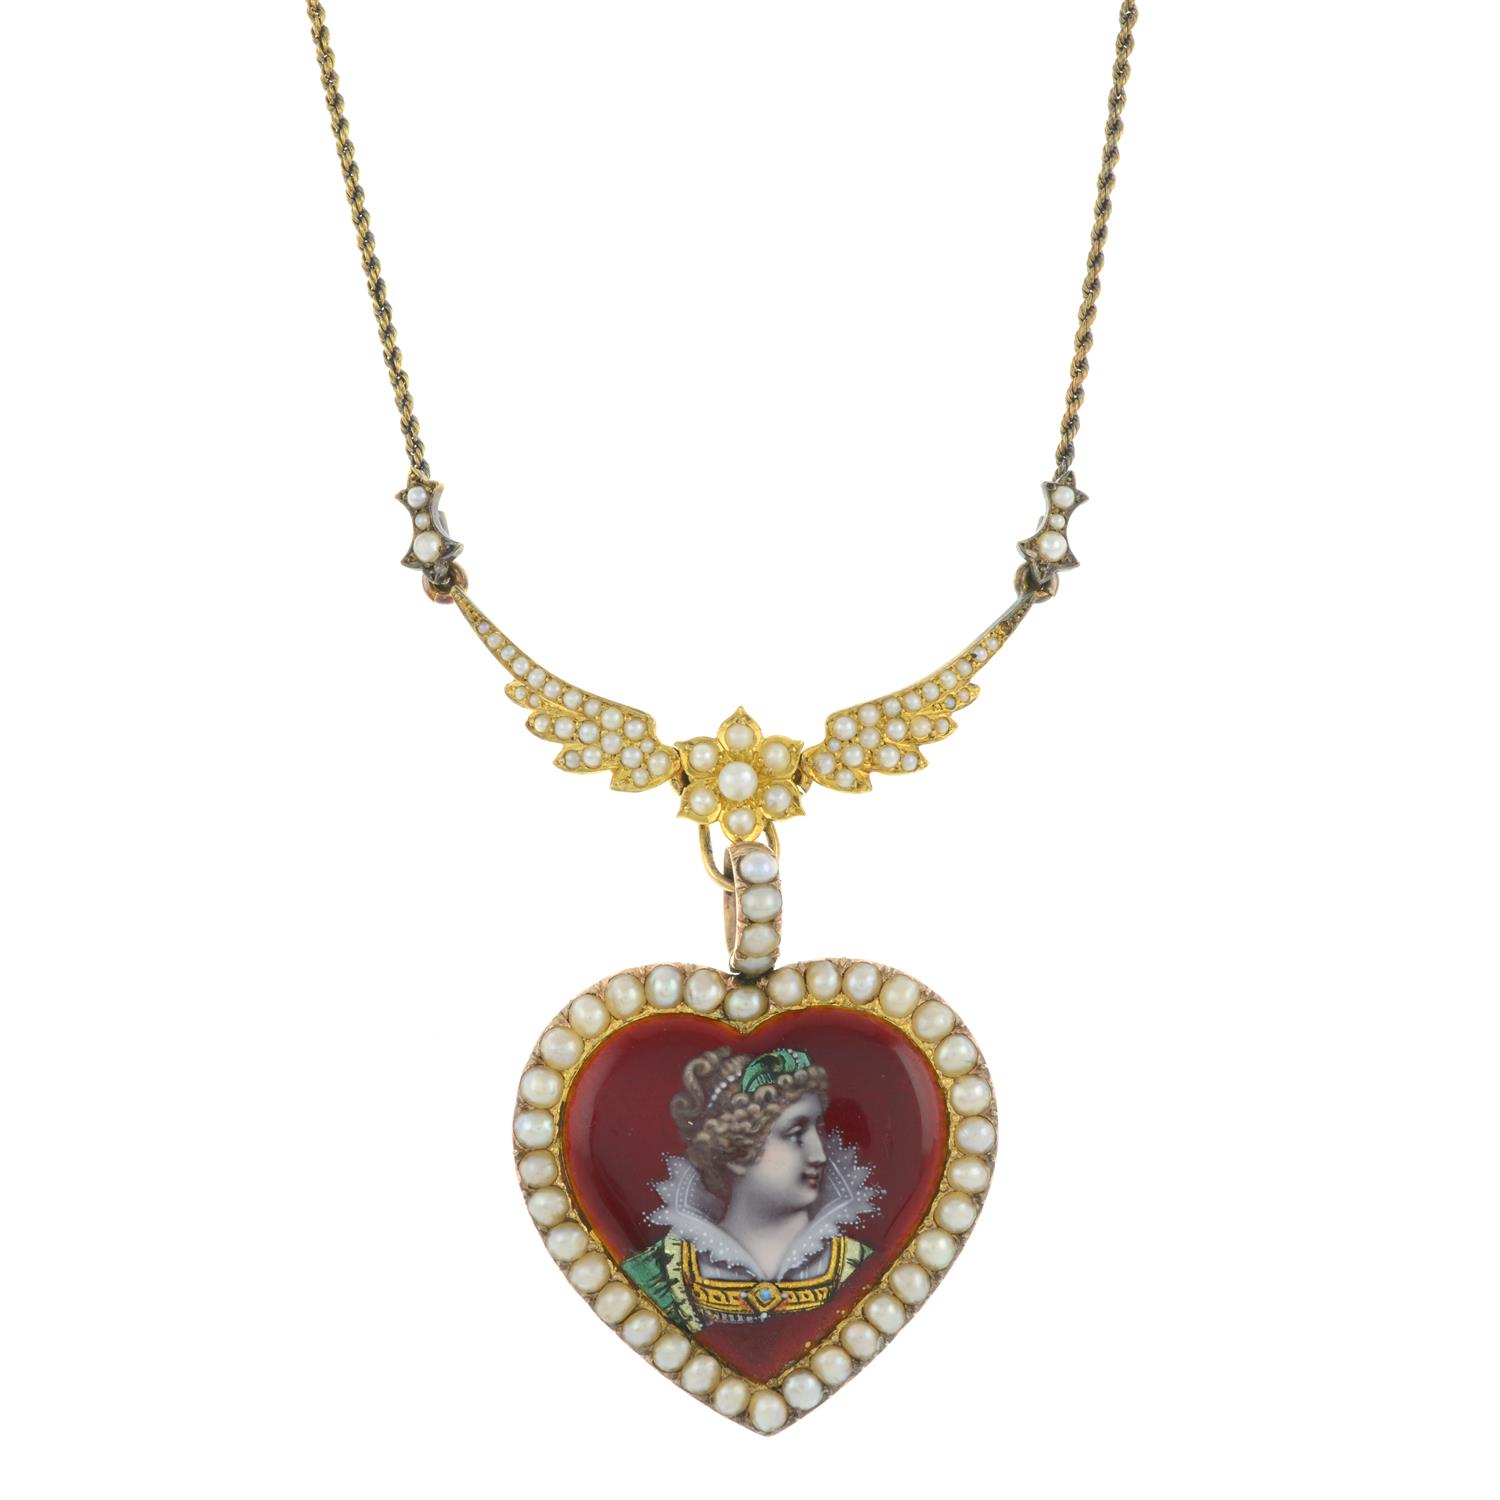 Late 19th century gold enamel heart and wings necklace - Image 2 of 5